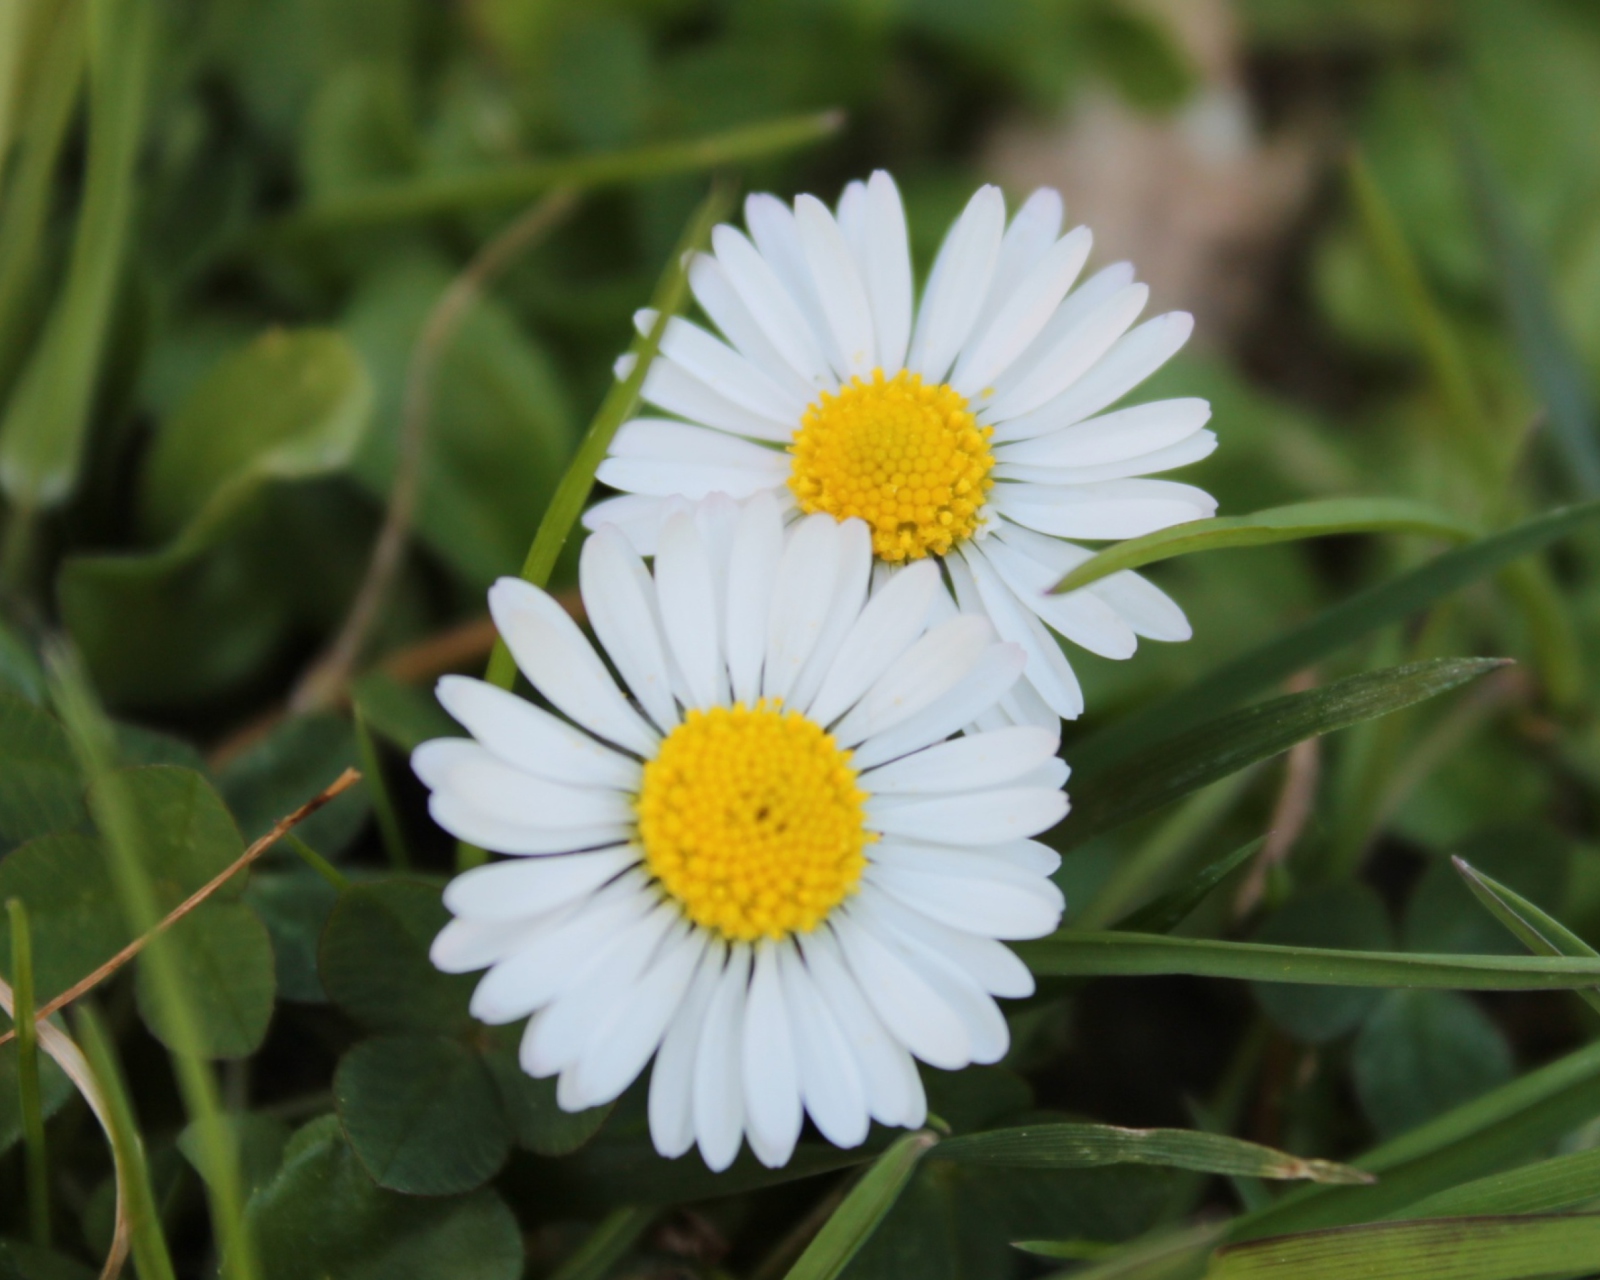 Two Daisies wallpaper 1600x1280